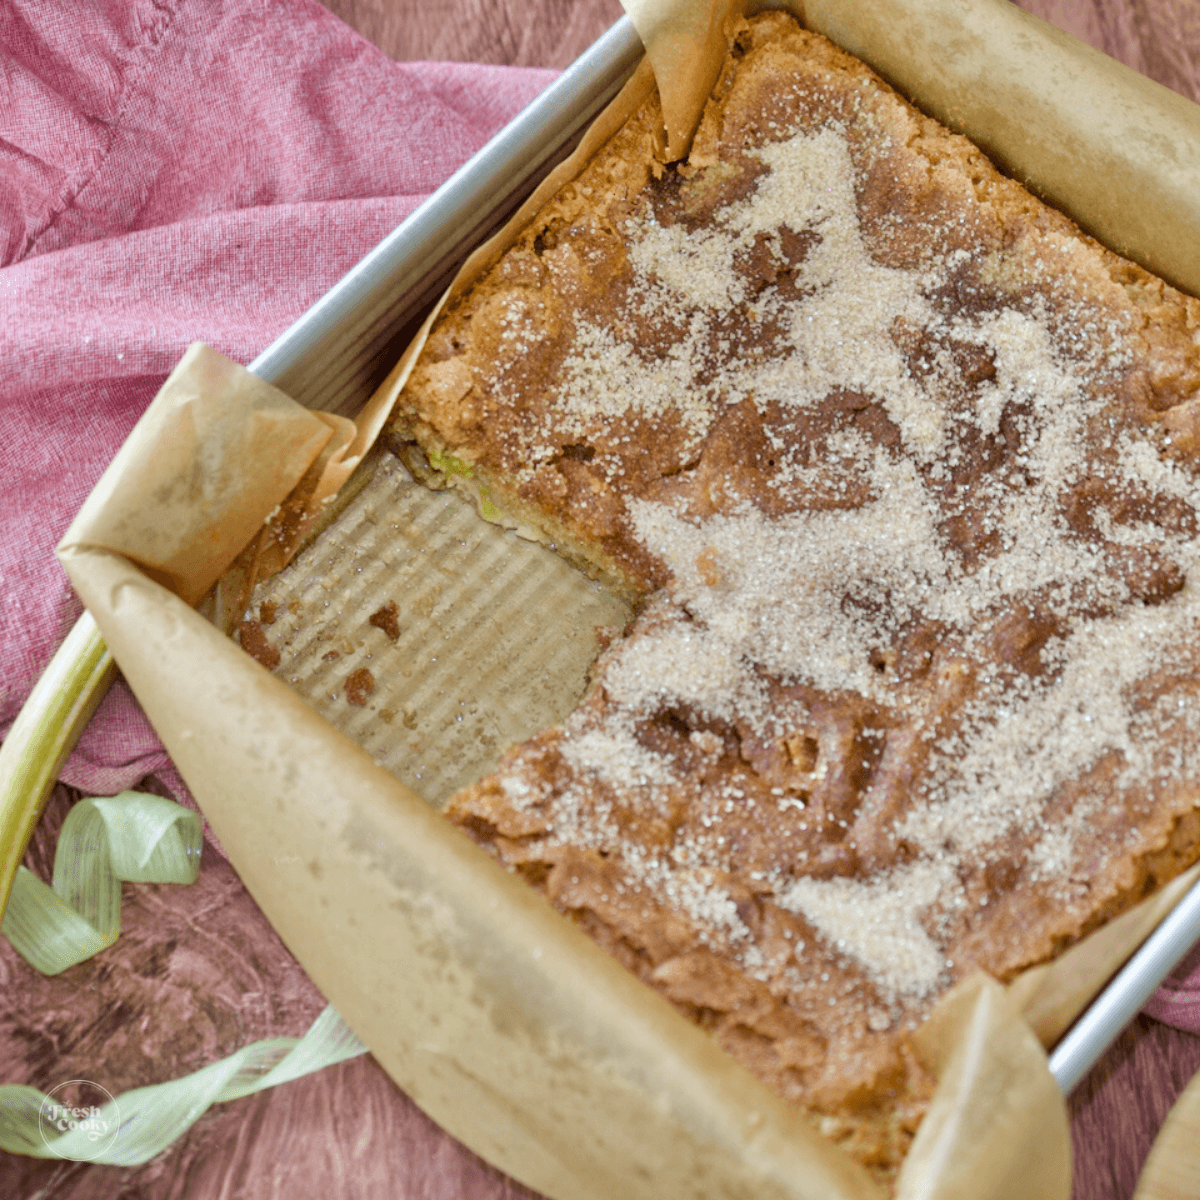 Square pan filled with rhubarb coffee cake with one slice missing, ribbons of rhubarb and a pink napkin.